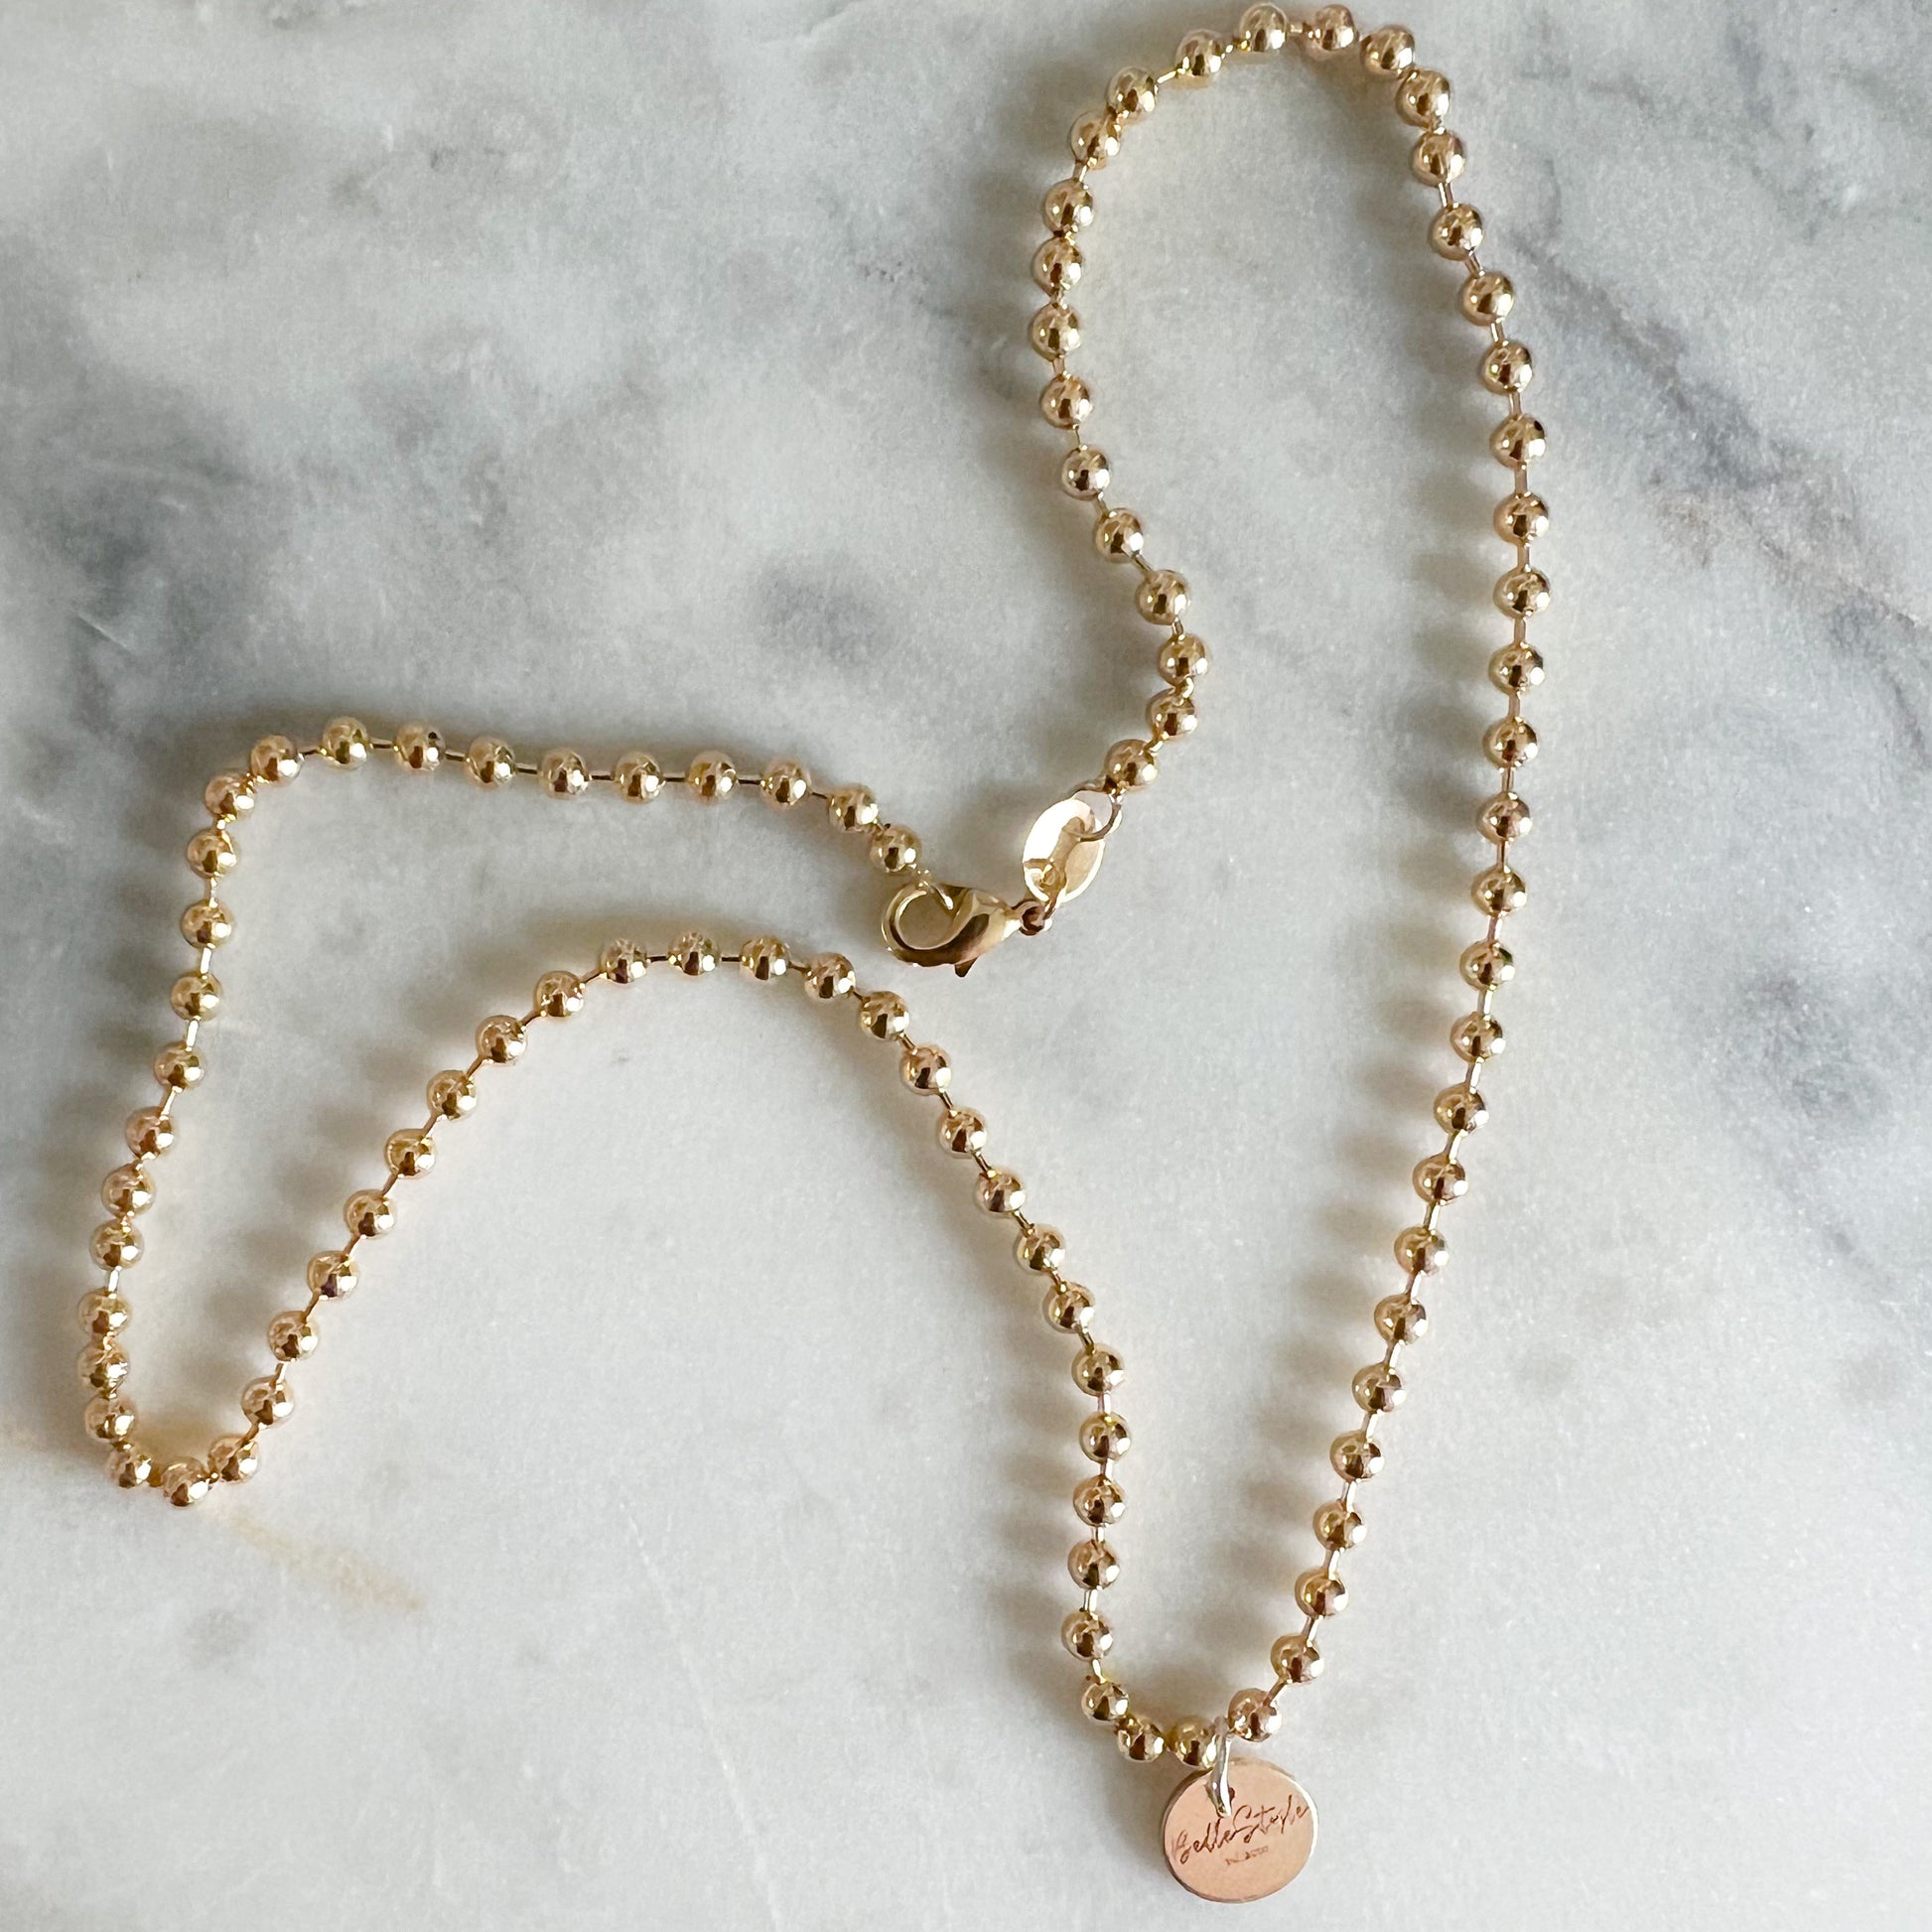 Logo Ball Chain Gold Necklace - BelleStyle